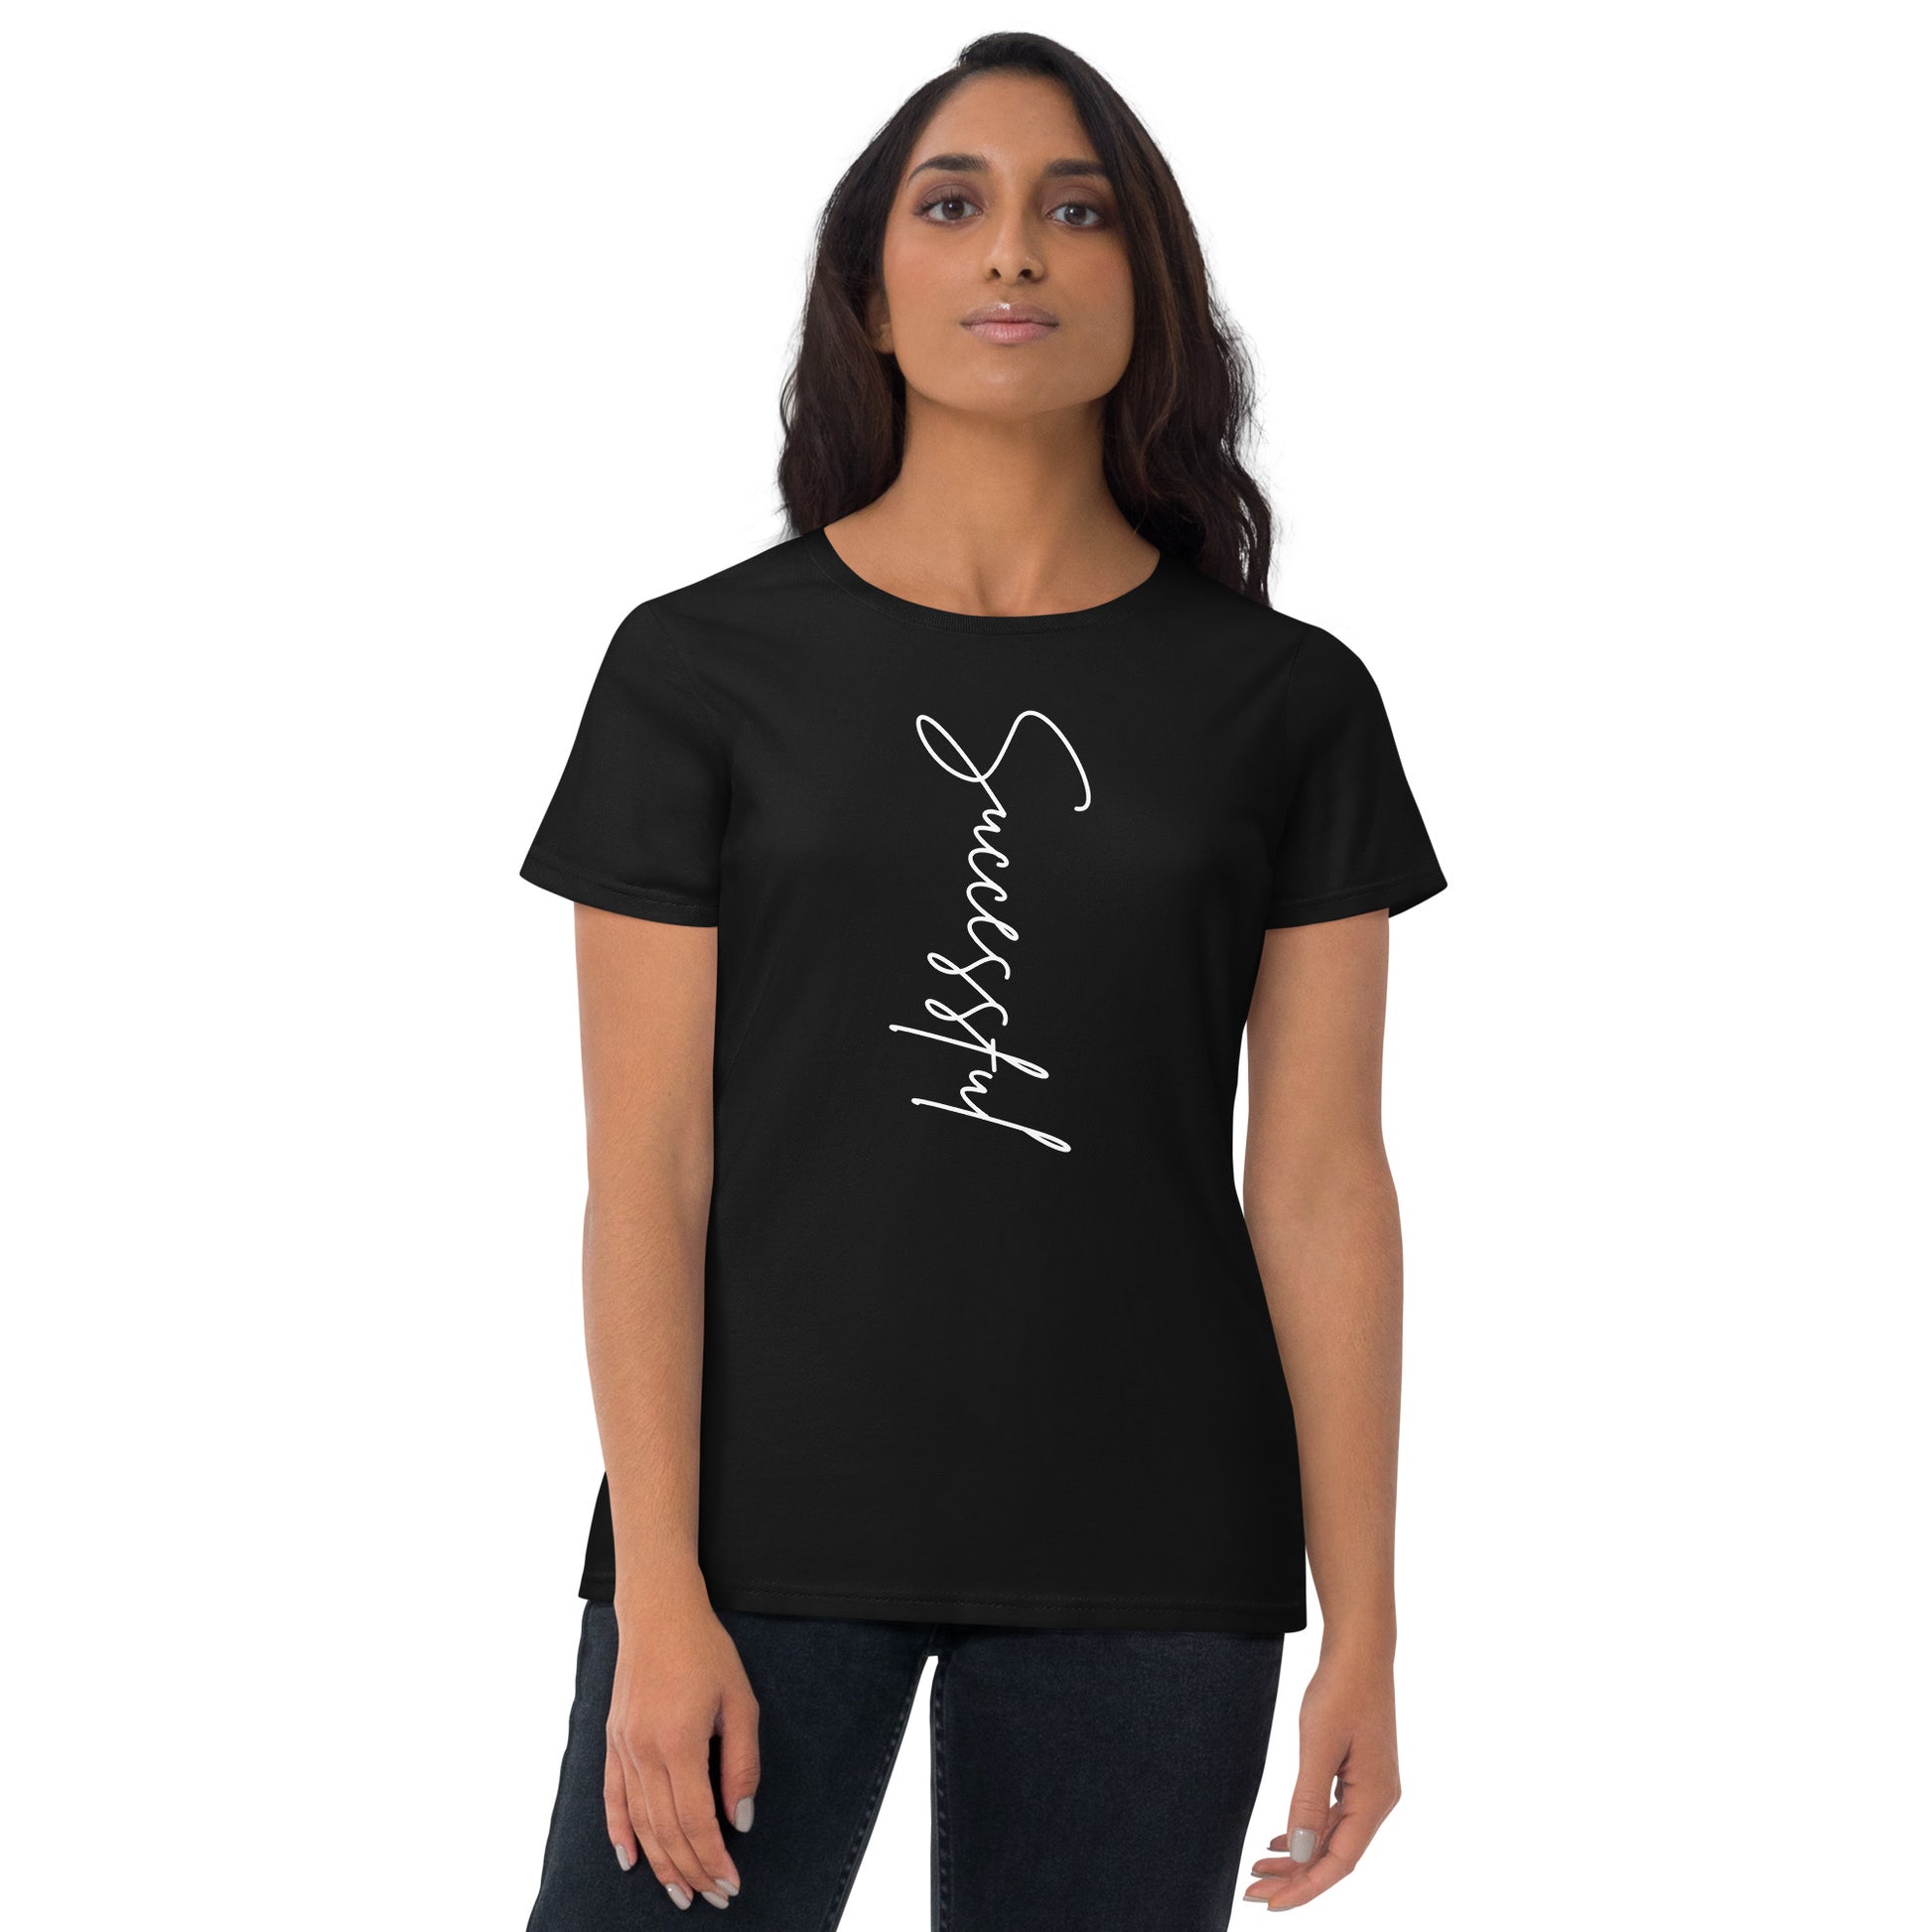 Invest In Women's Sports Embroidered Black Tee – GOALS